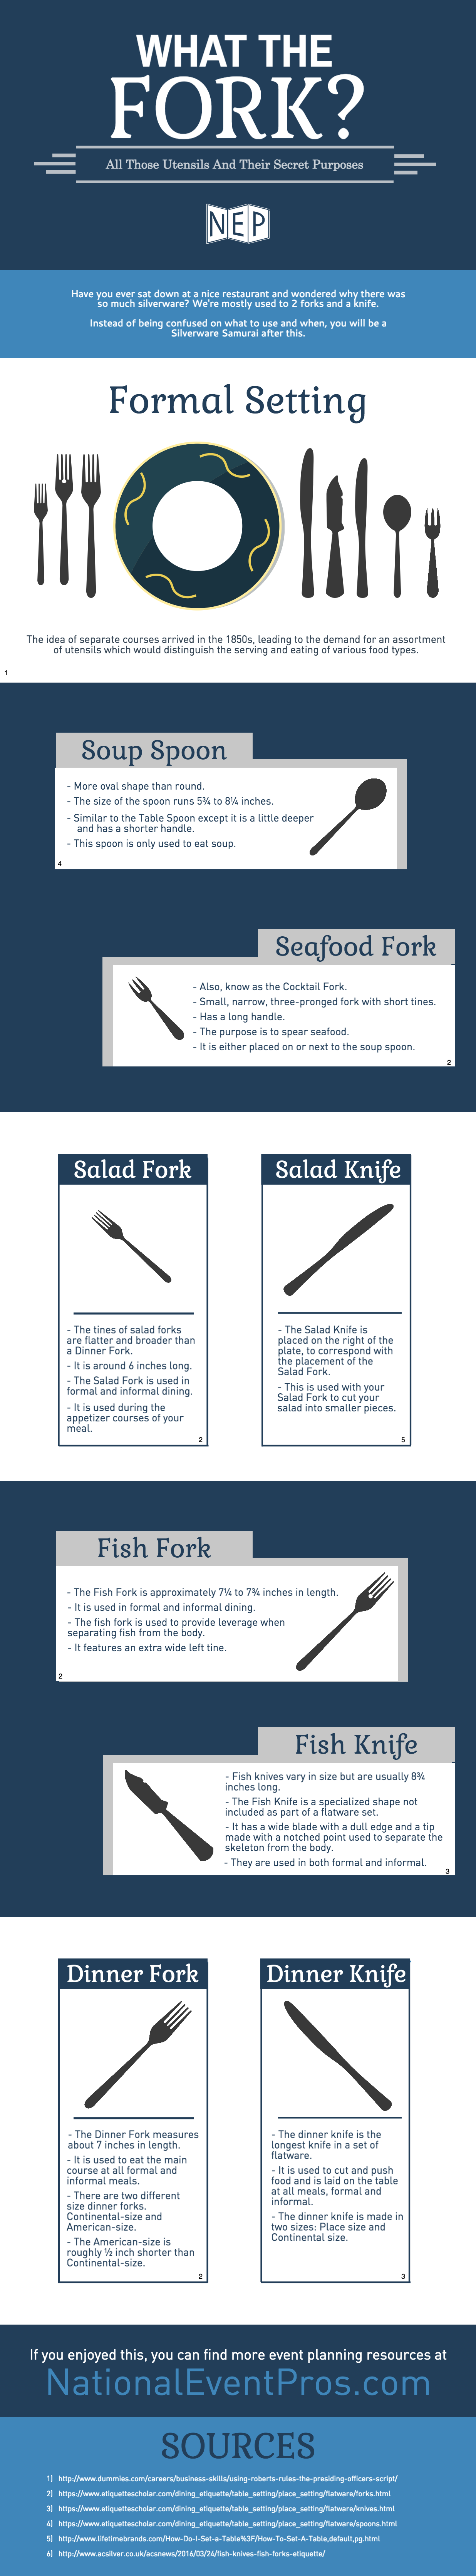 Infographic: What The Fork?